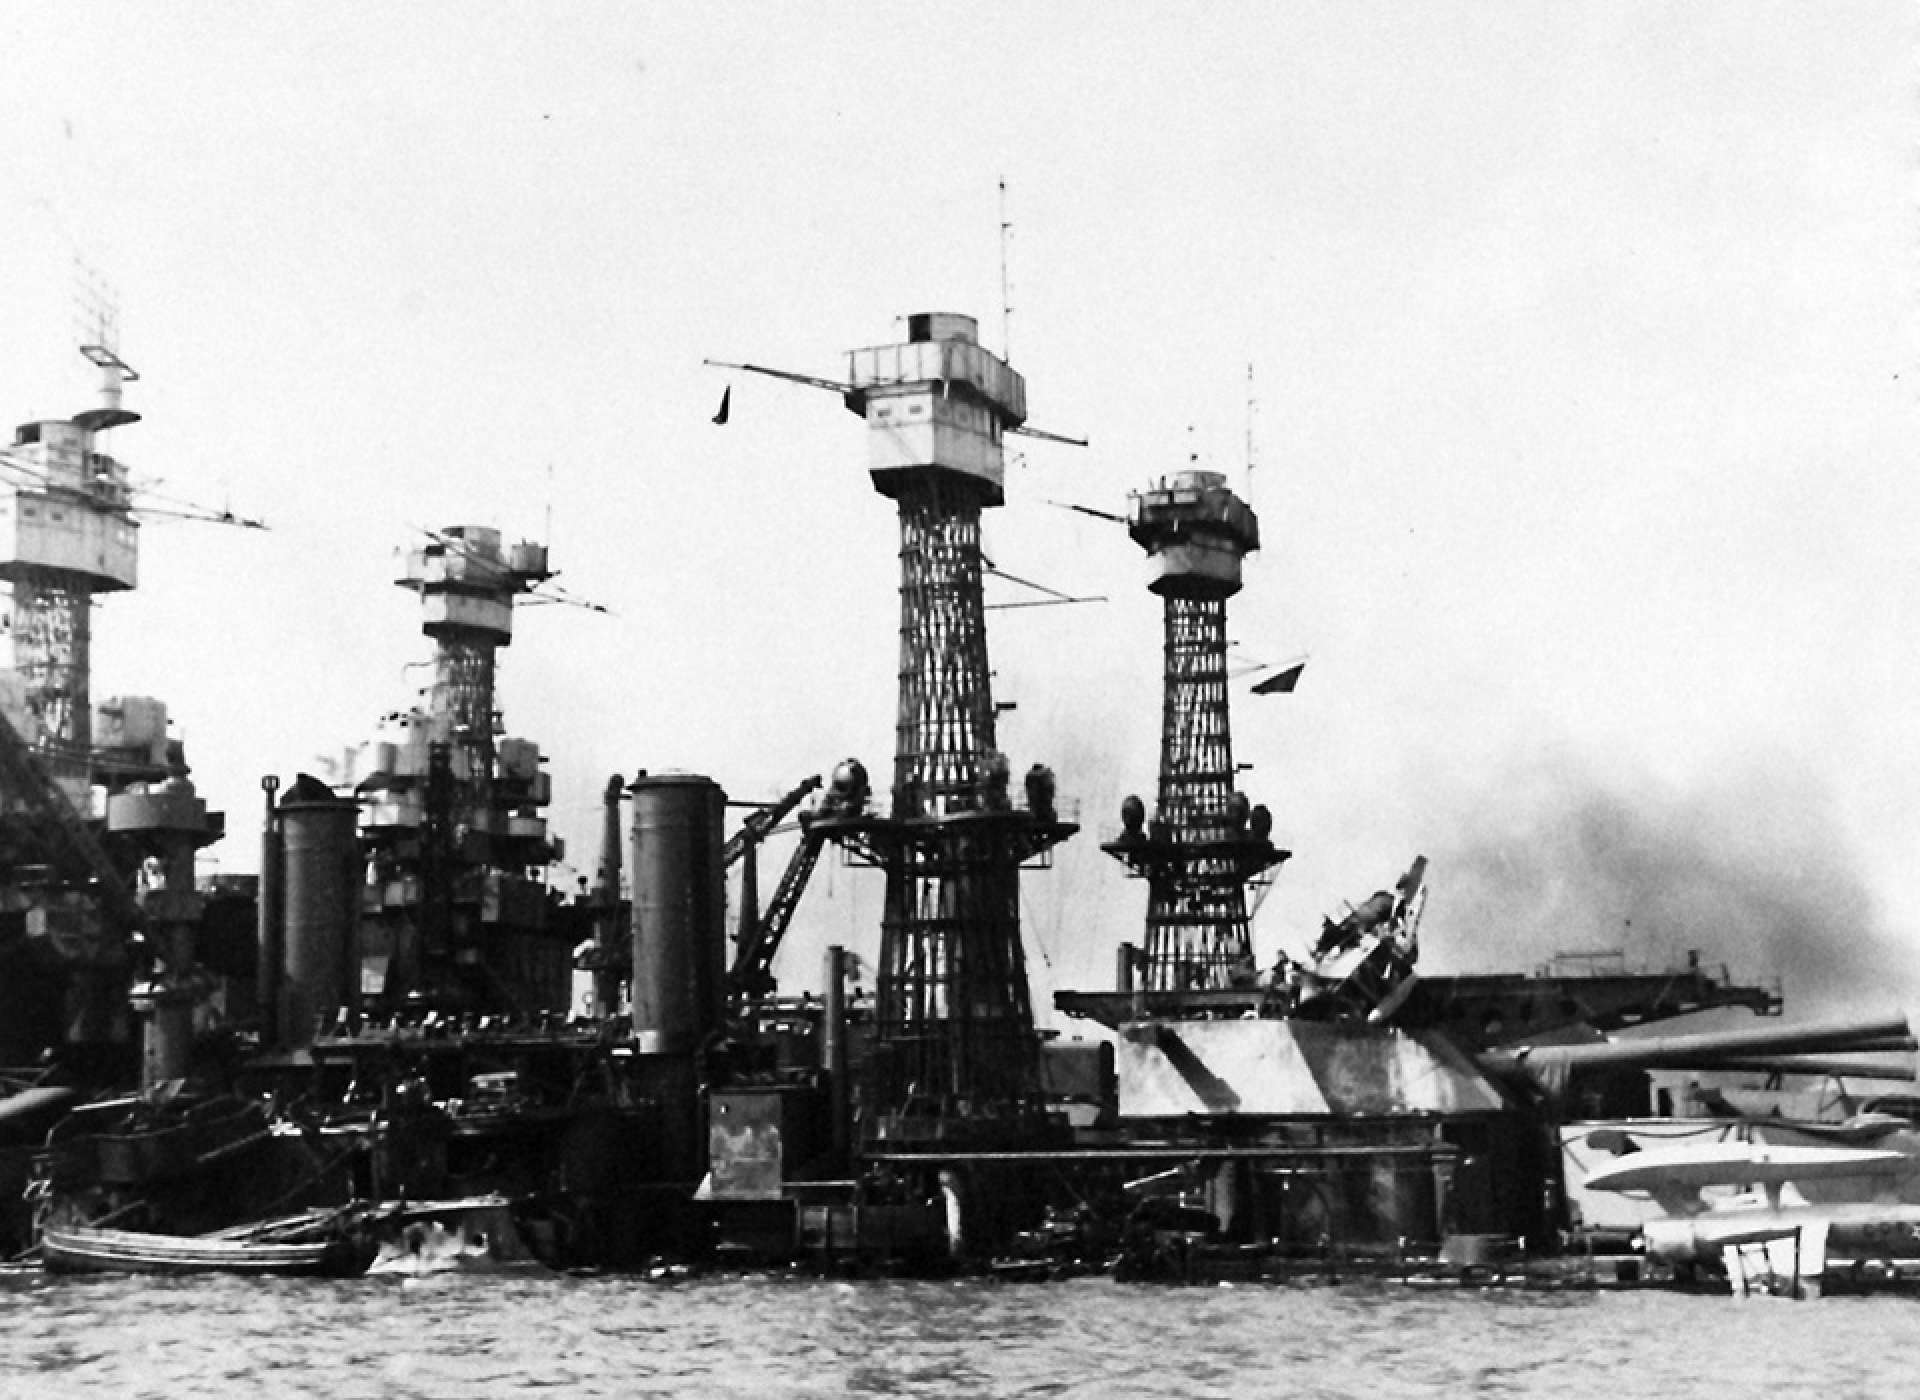 USS West Virginia (BB-48) settled on the bottom after the attack on Pearl Harbor